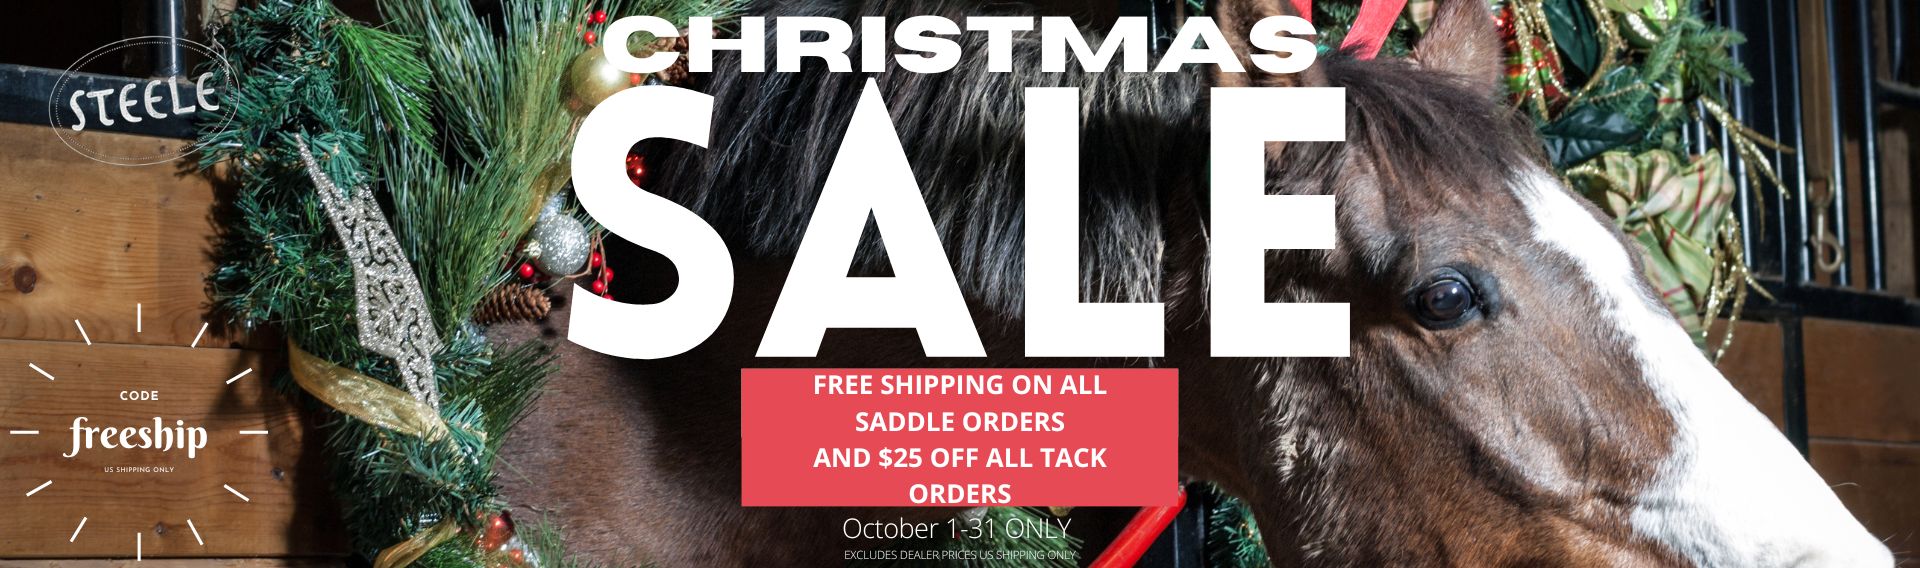 Free Shipping On All Saddle Orders (1920 × 568 Px) (2)